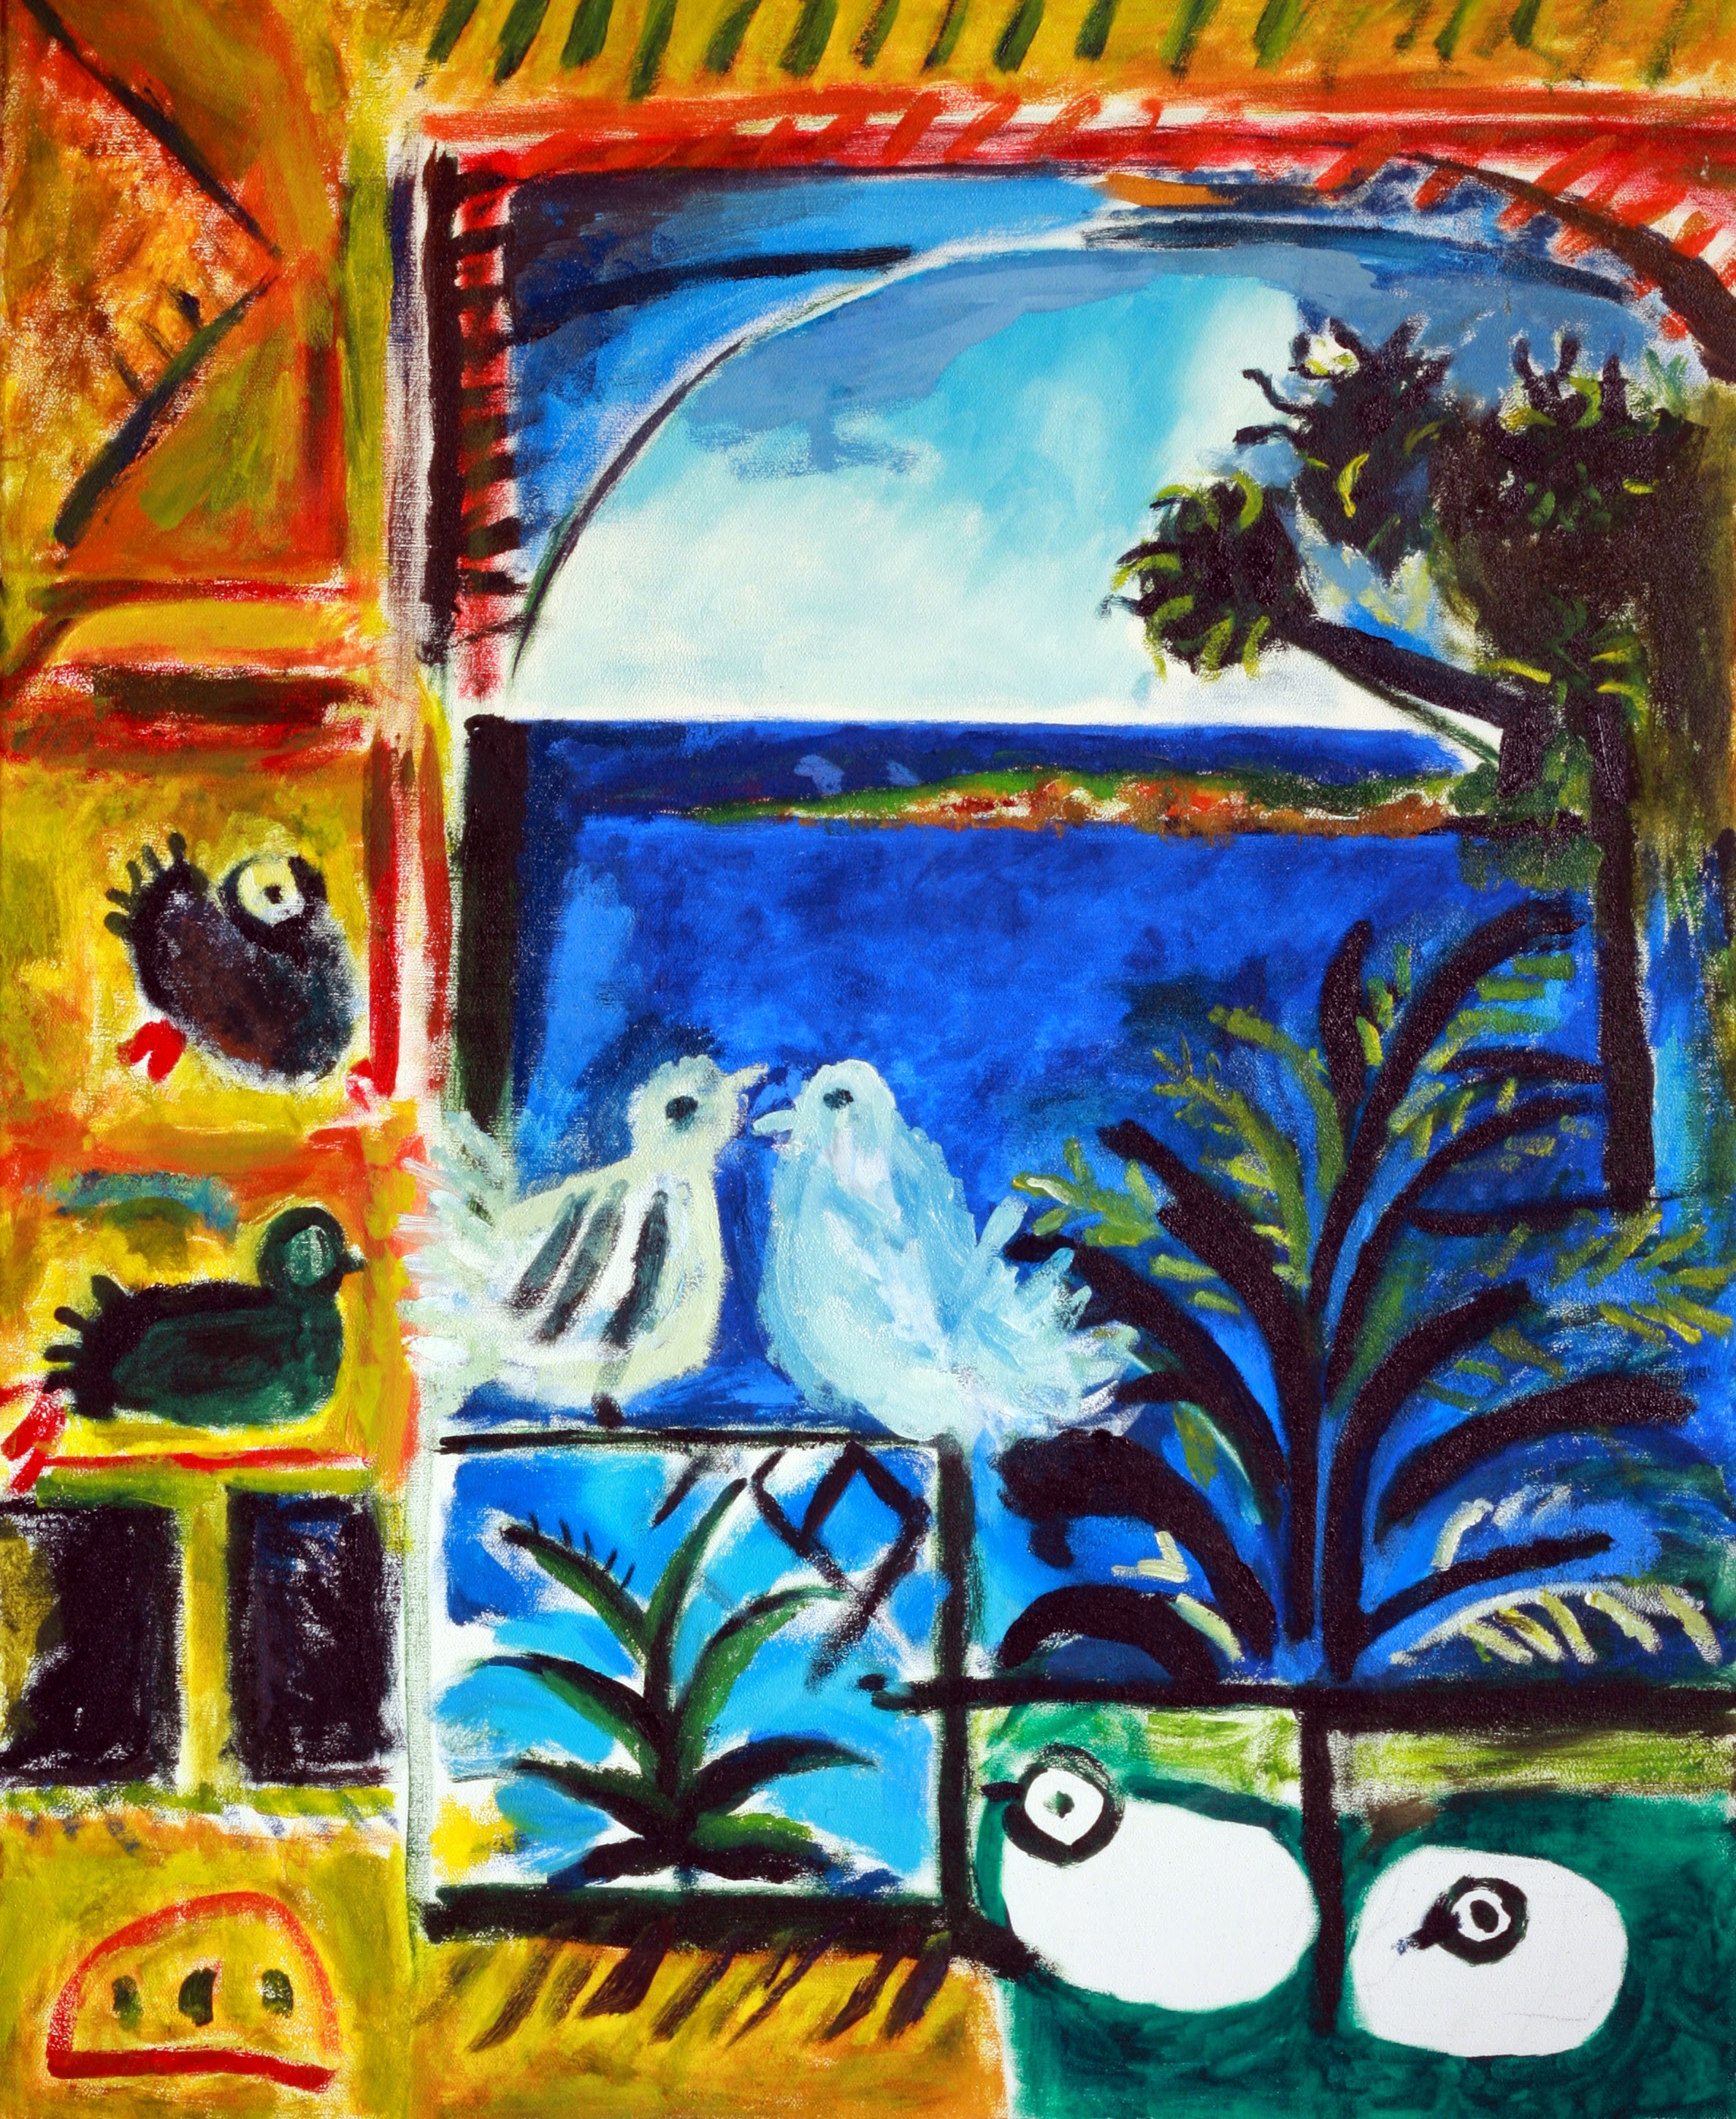 Picasso's Pigeons (2010)